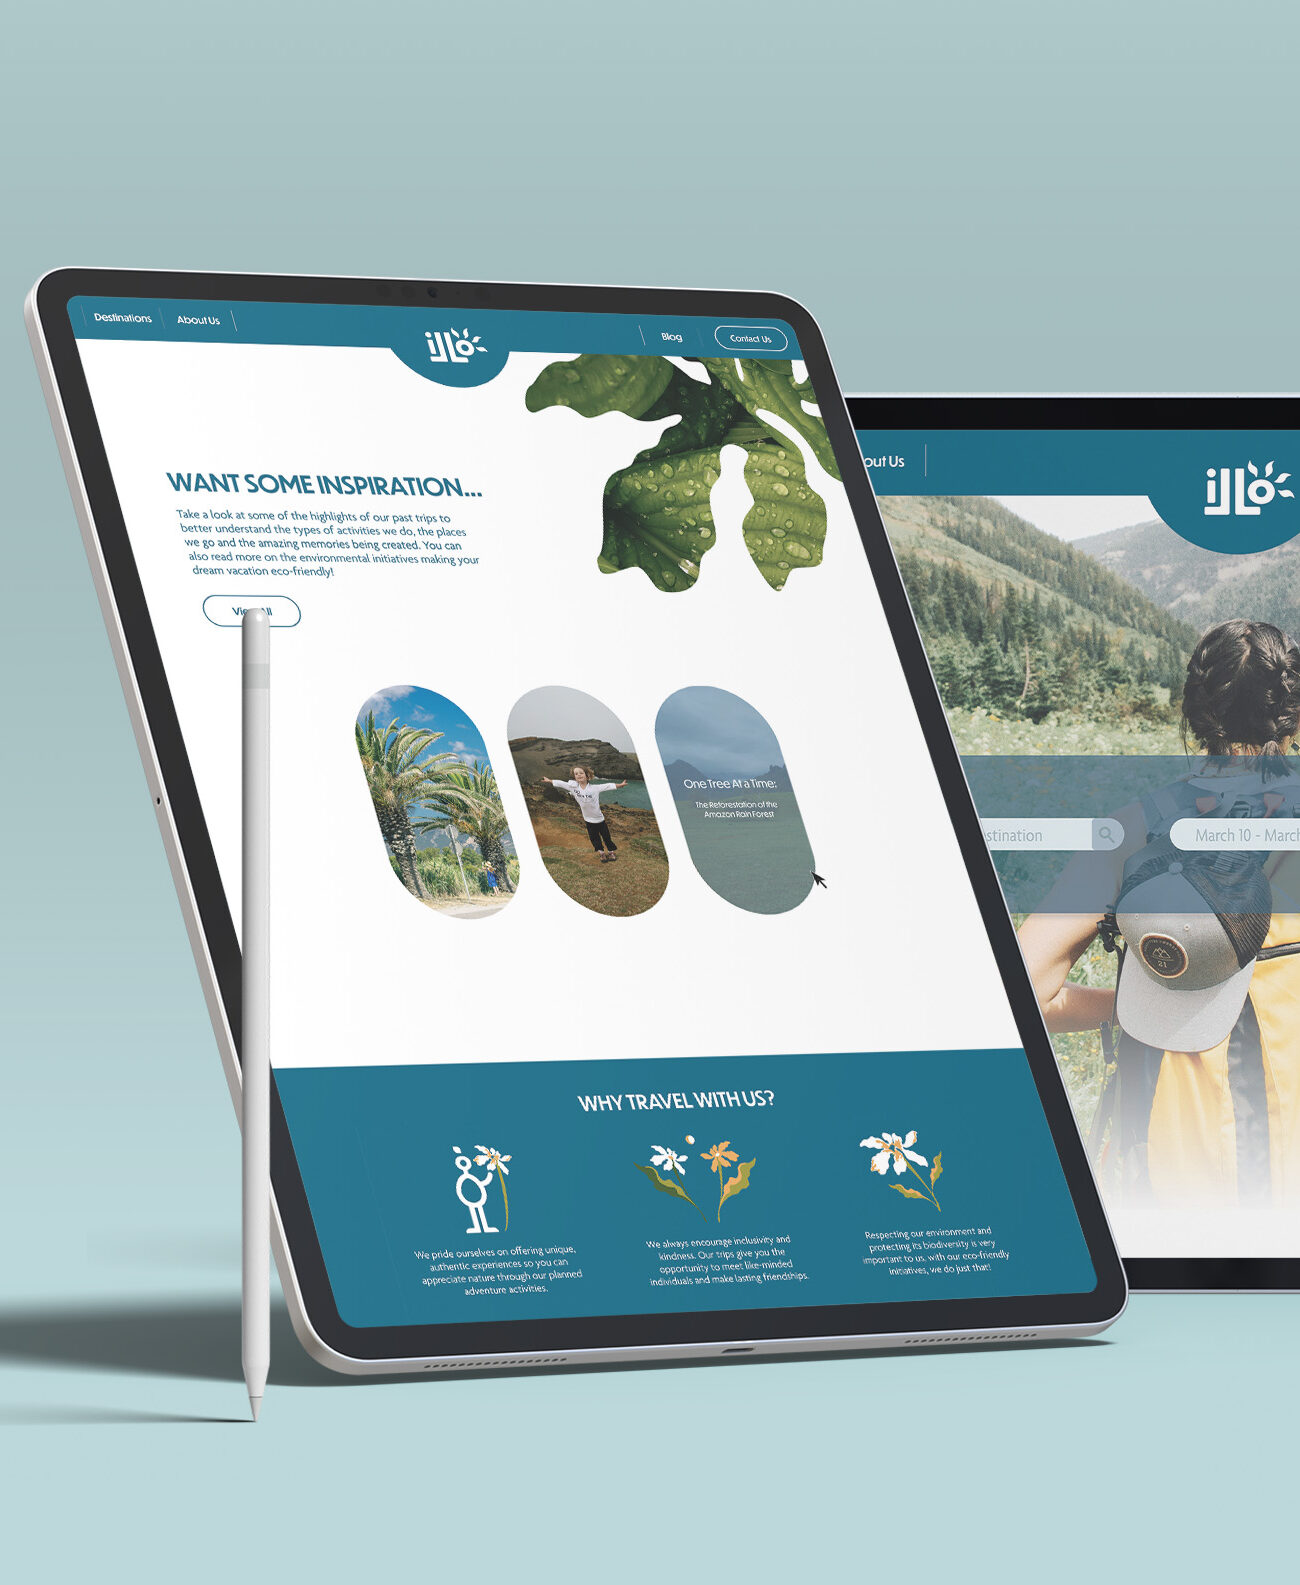 illo website landing page. Features the brand mascot Milo waving fro behind a customizable search bar to search flight plans and destinations on a visual background filled with nature.